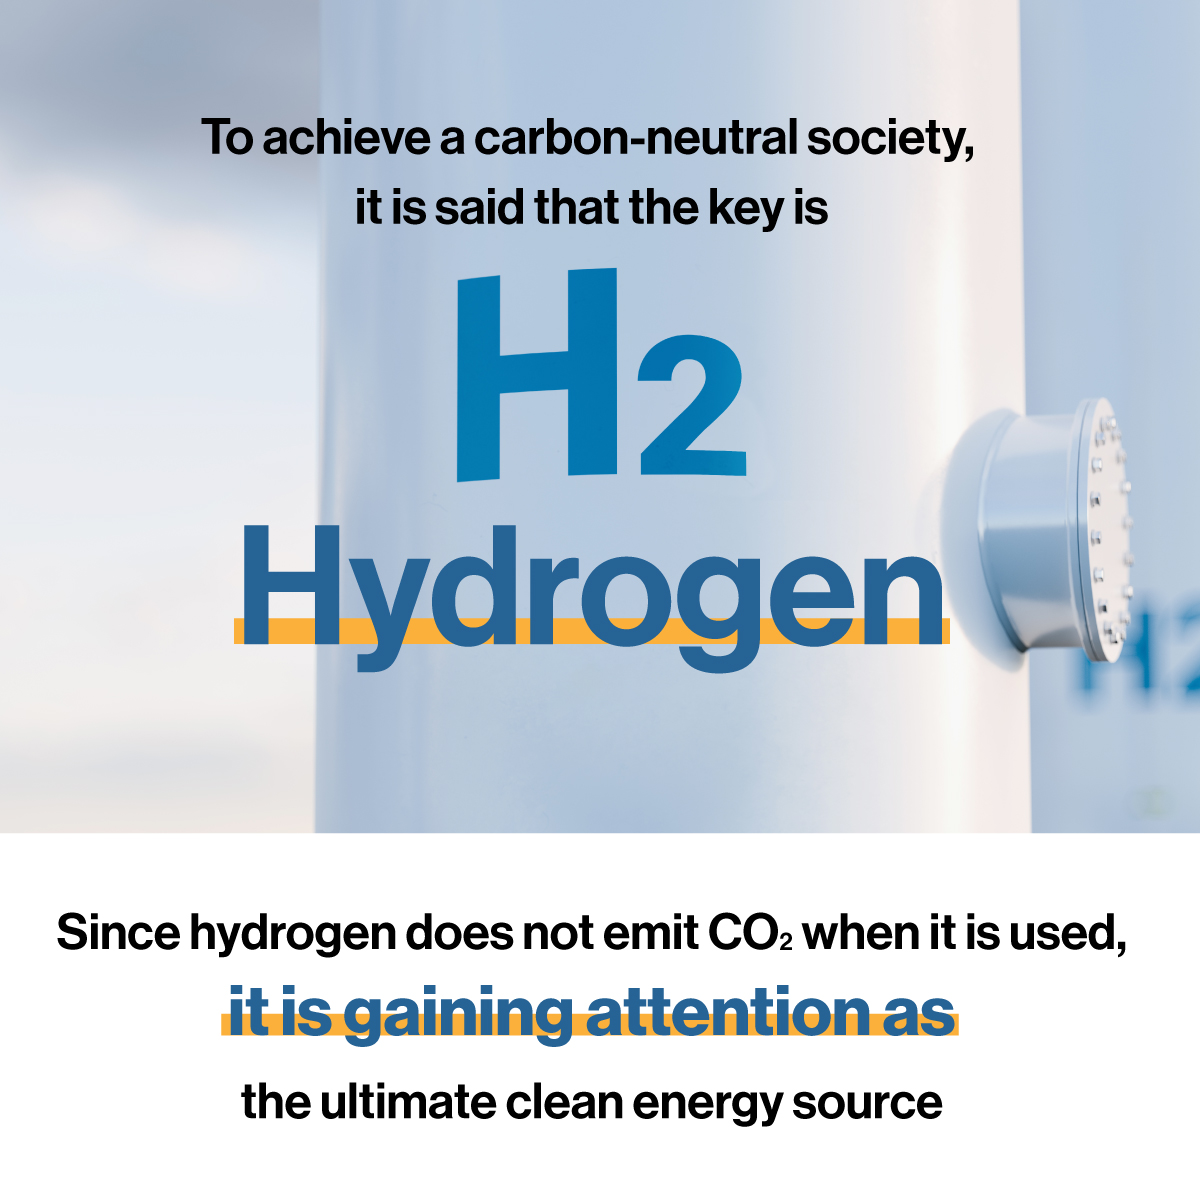 Hydrogen is gaining attention as the ultimate clean energy source